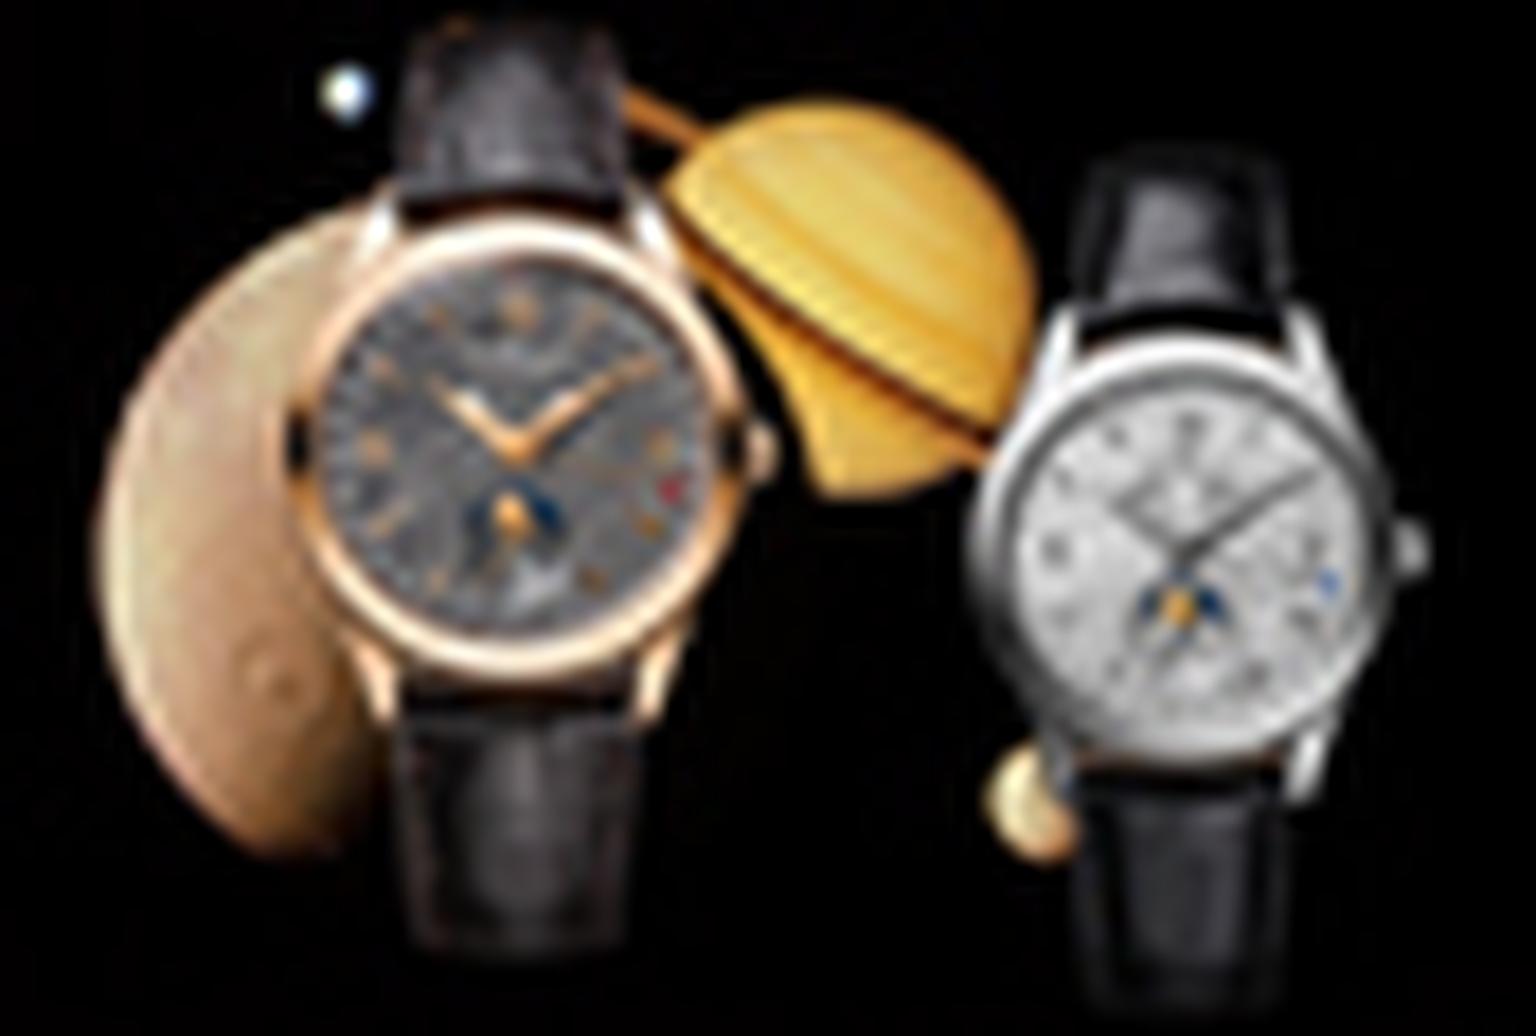 Jeager Lecoultre Master Calendar watches